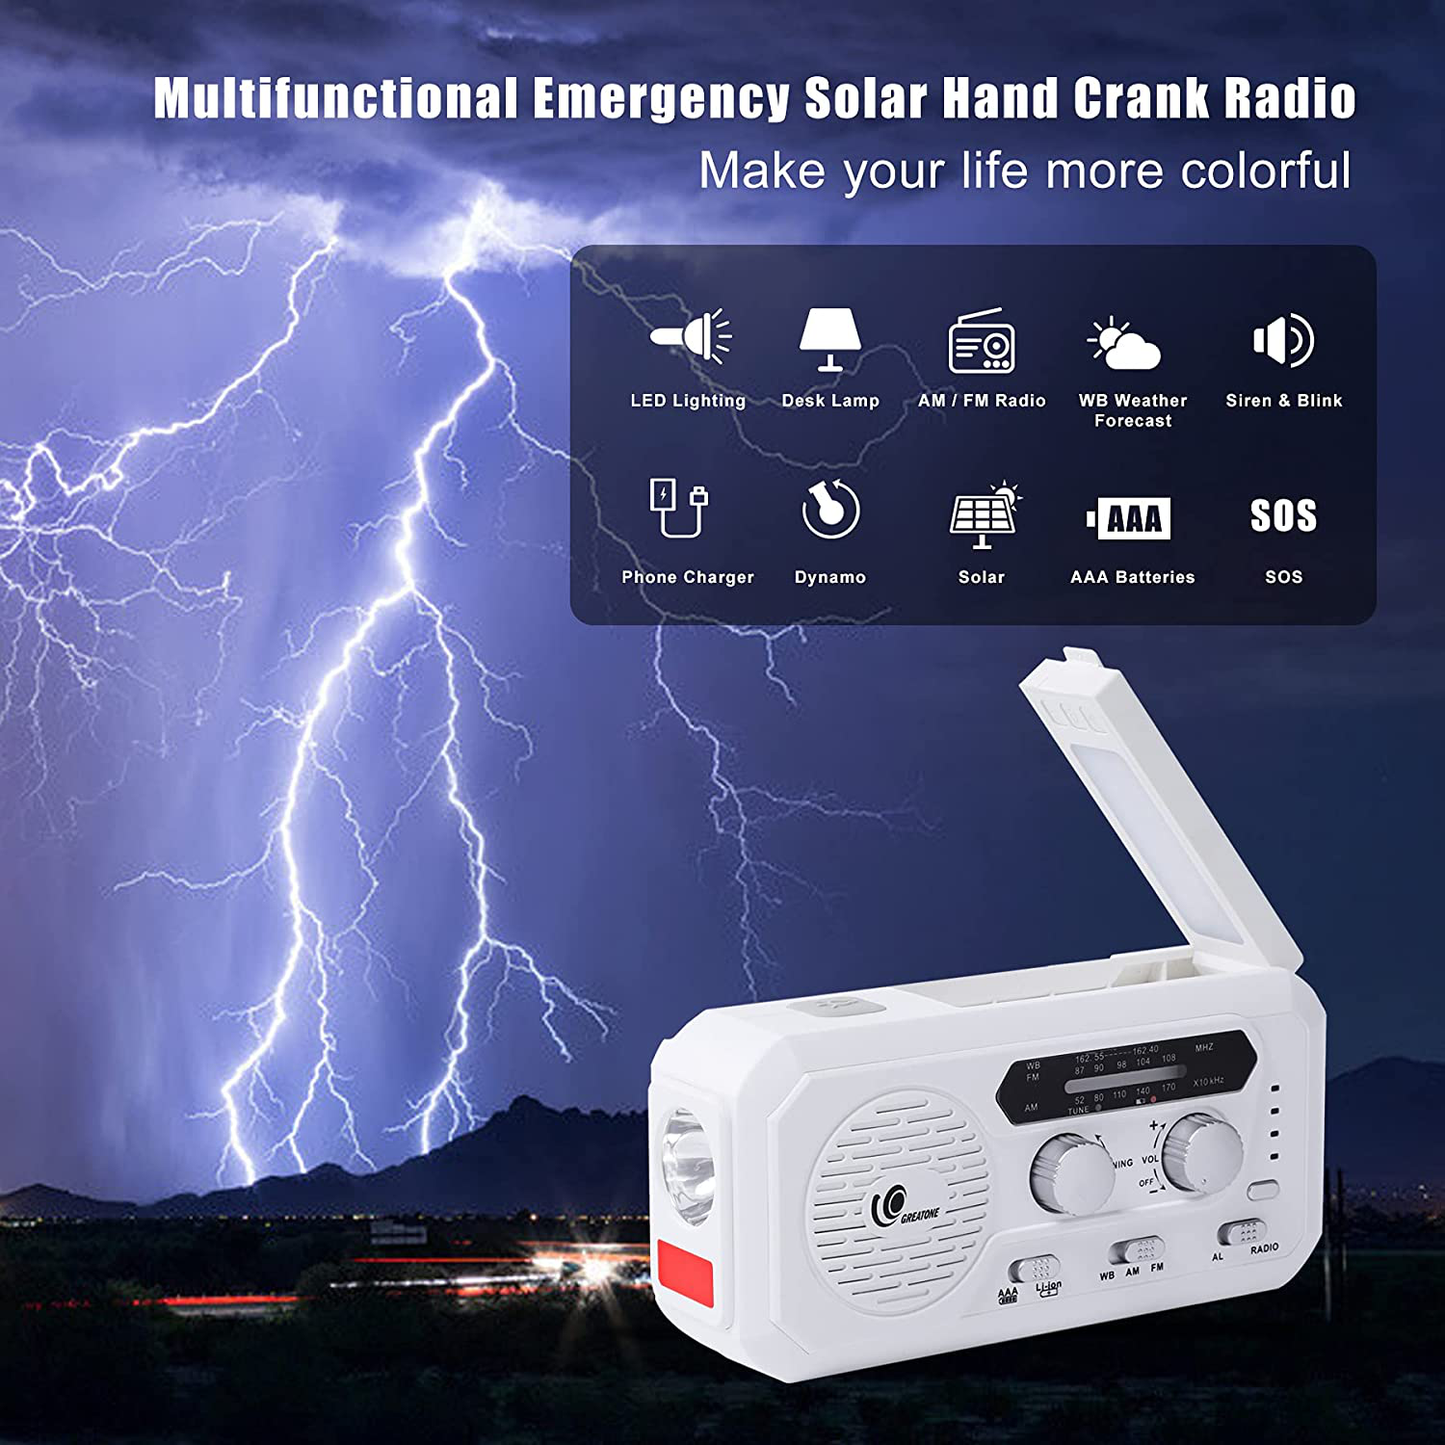 GREATONE Weather Radio Emergency Solar Crank Radio with Flashlight and Reading Lamp,AM/FM/NOAA Protable Weather Radio for Home and Outdoor,5000mAh Power Bank SOS Alarm